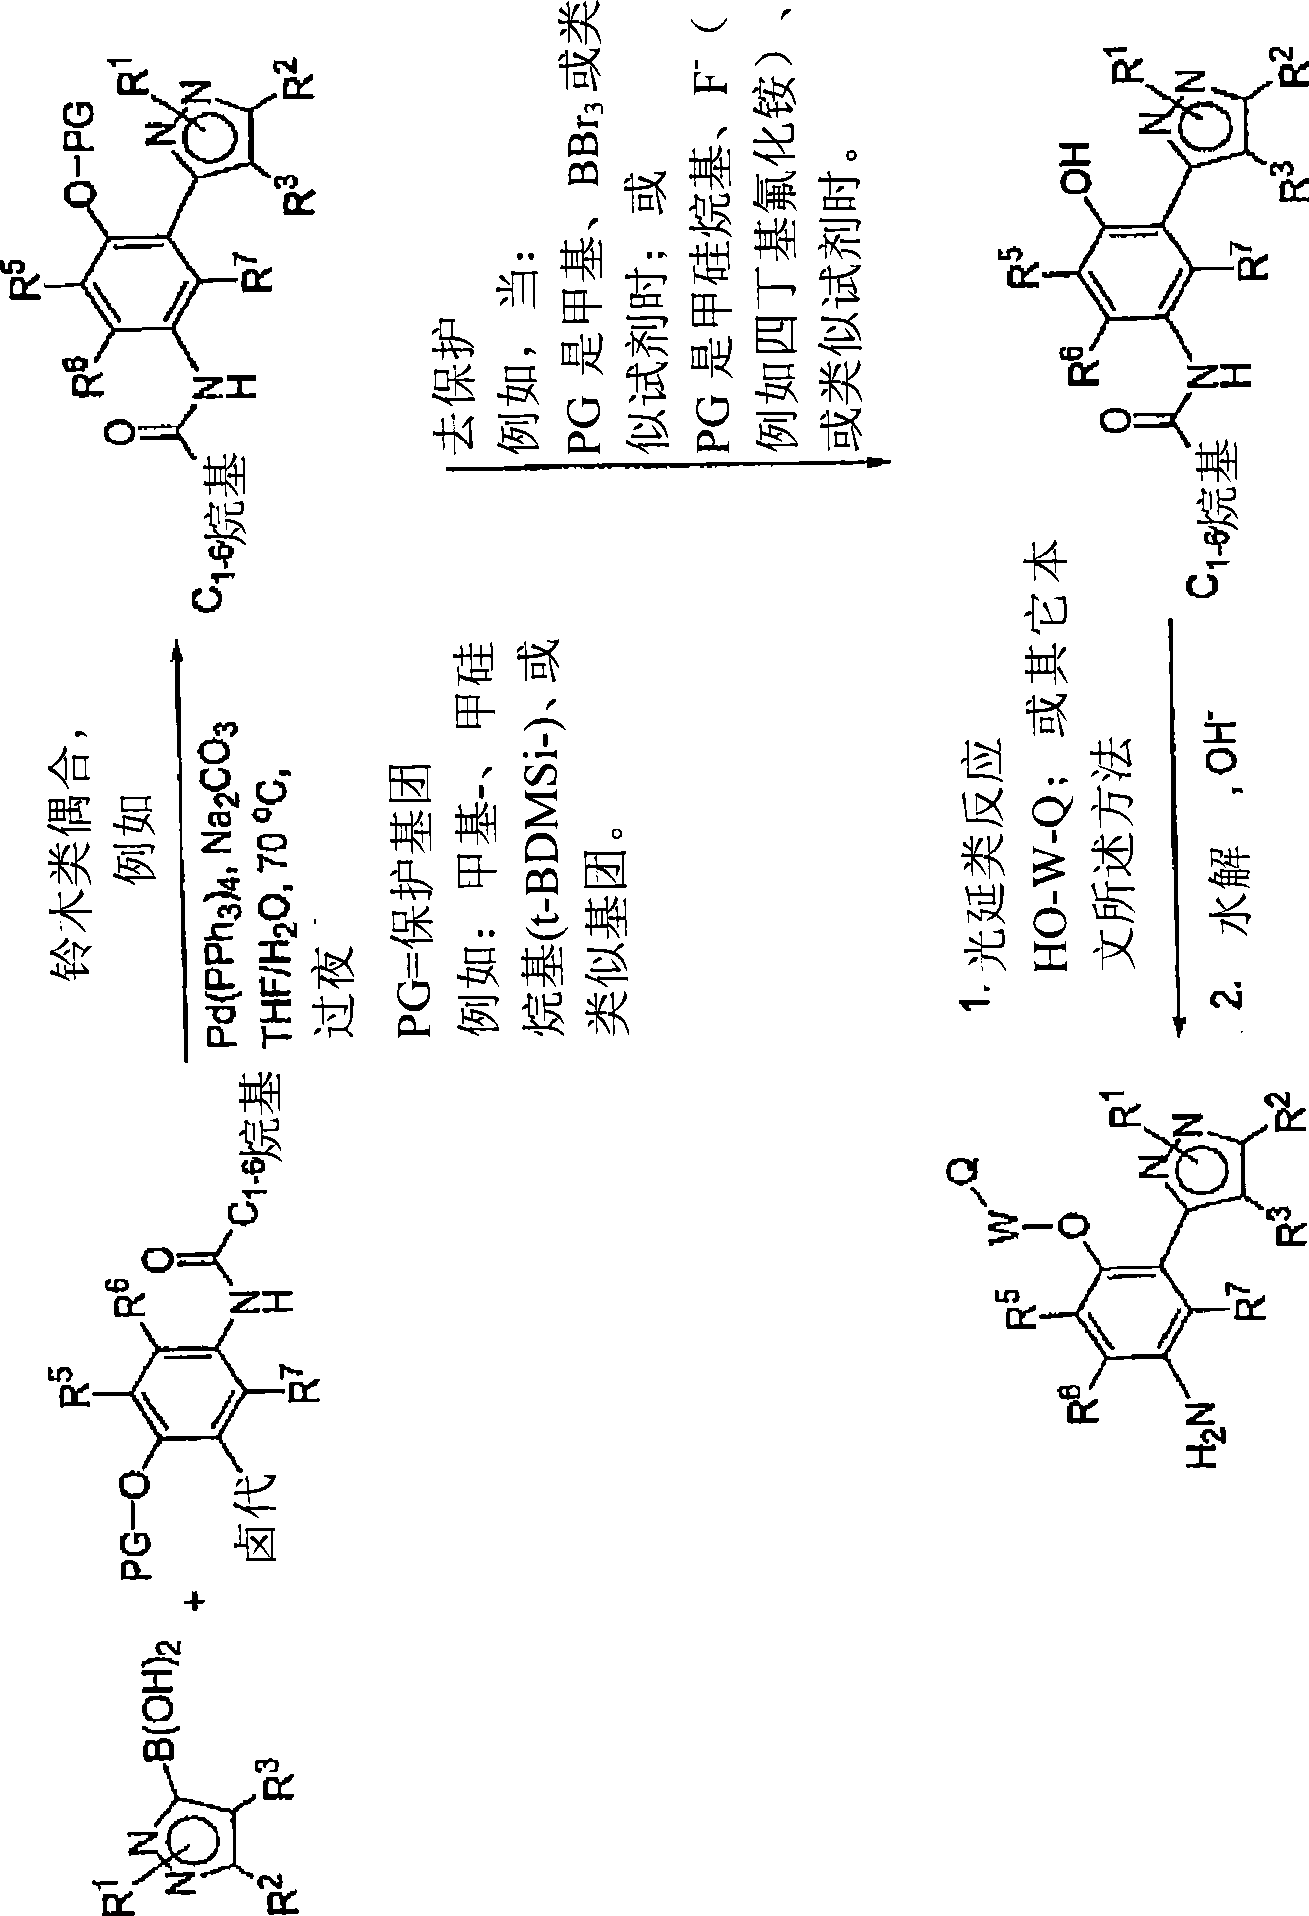 3-pyraz0lyl-benzamide-4-ethers, secondary amines and derivatives thereof as modulators of the 5-ht2a serotonin receptor useful for the treatment of disorders related thereto